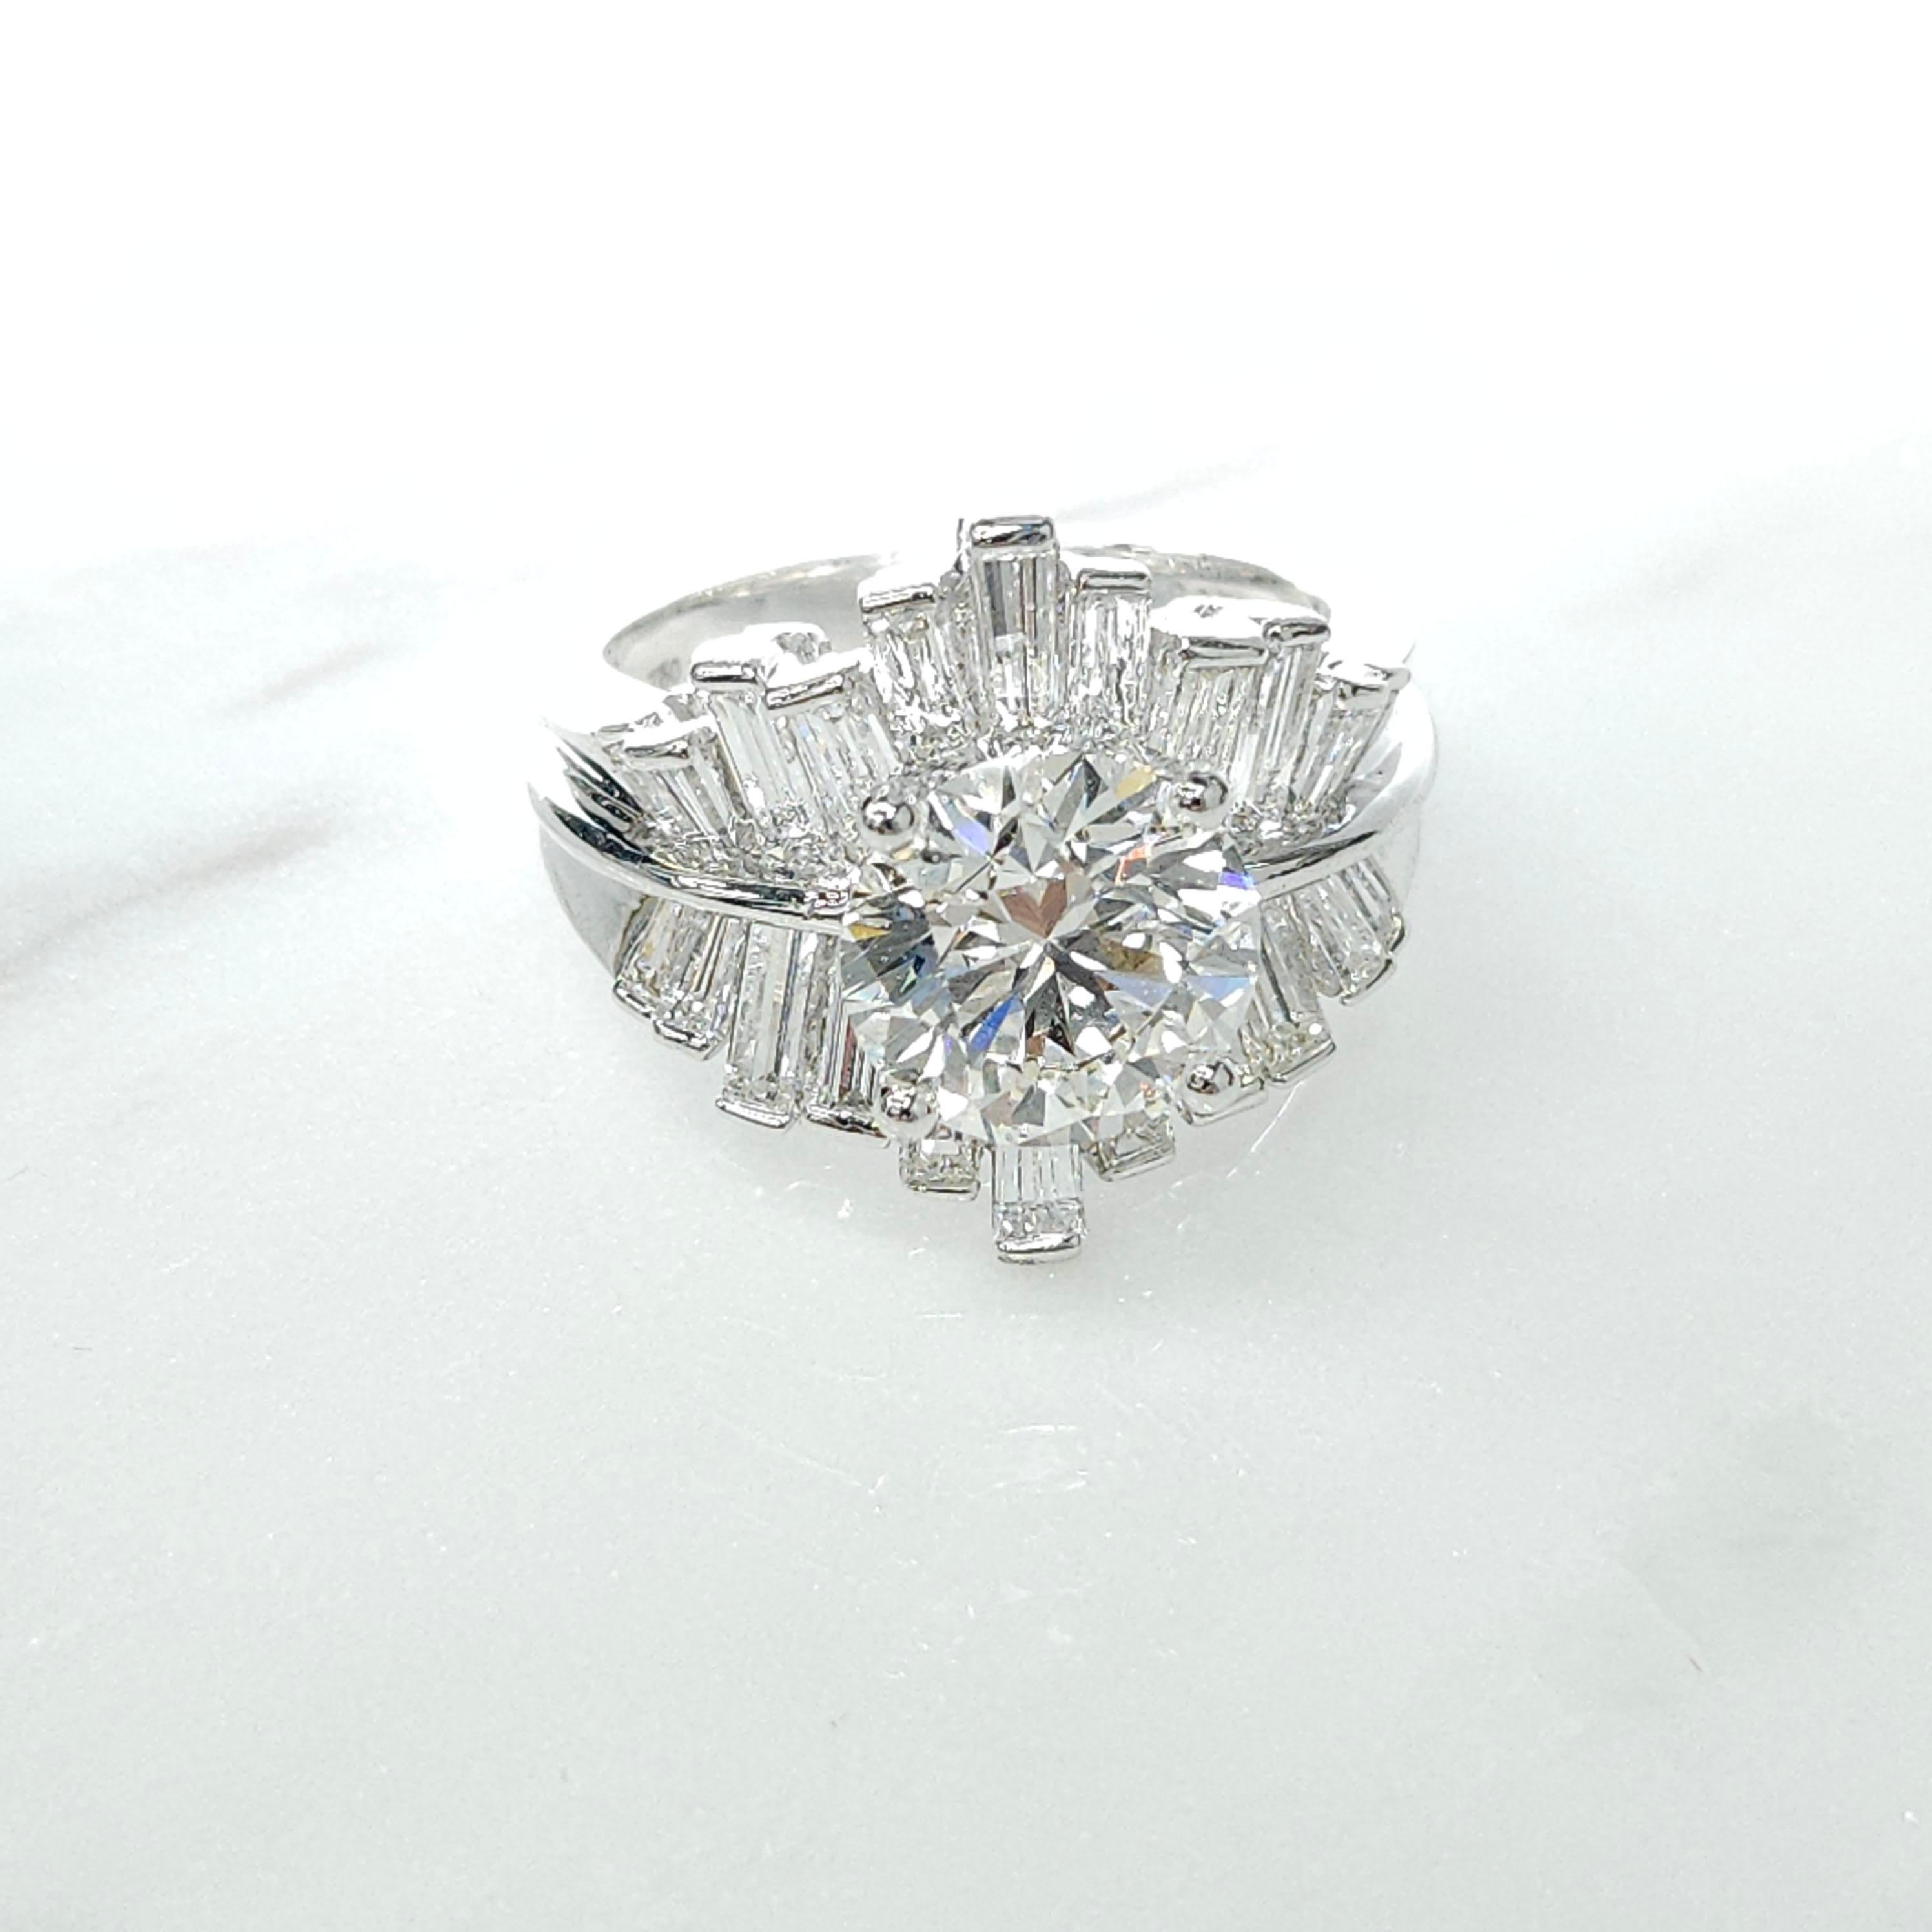 Prepare to be captivated by the eternal beauty and sophistication of this exceptional GIA Certified 2.55 Carat Natural Round Diamond Ring, crafted in a modern and unique style, set in luxurious 18K white gold. The centerpiece of this exquisite ring